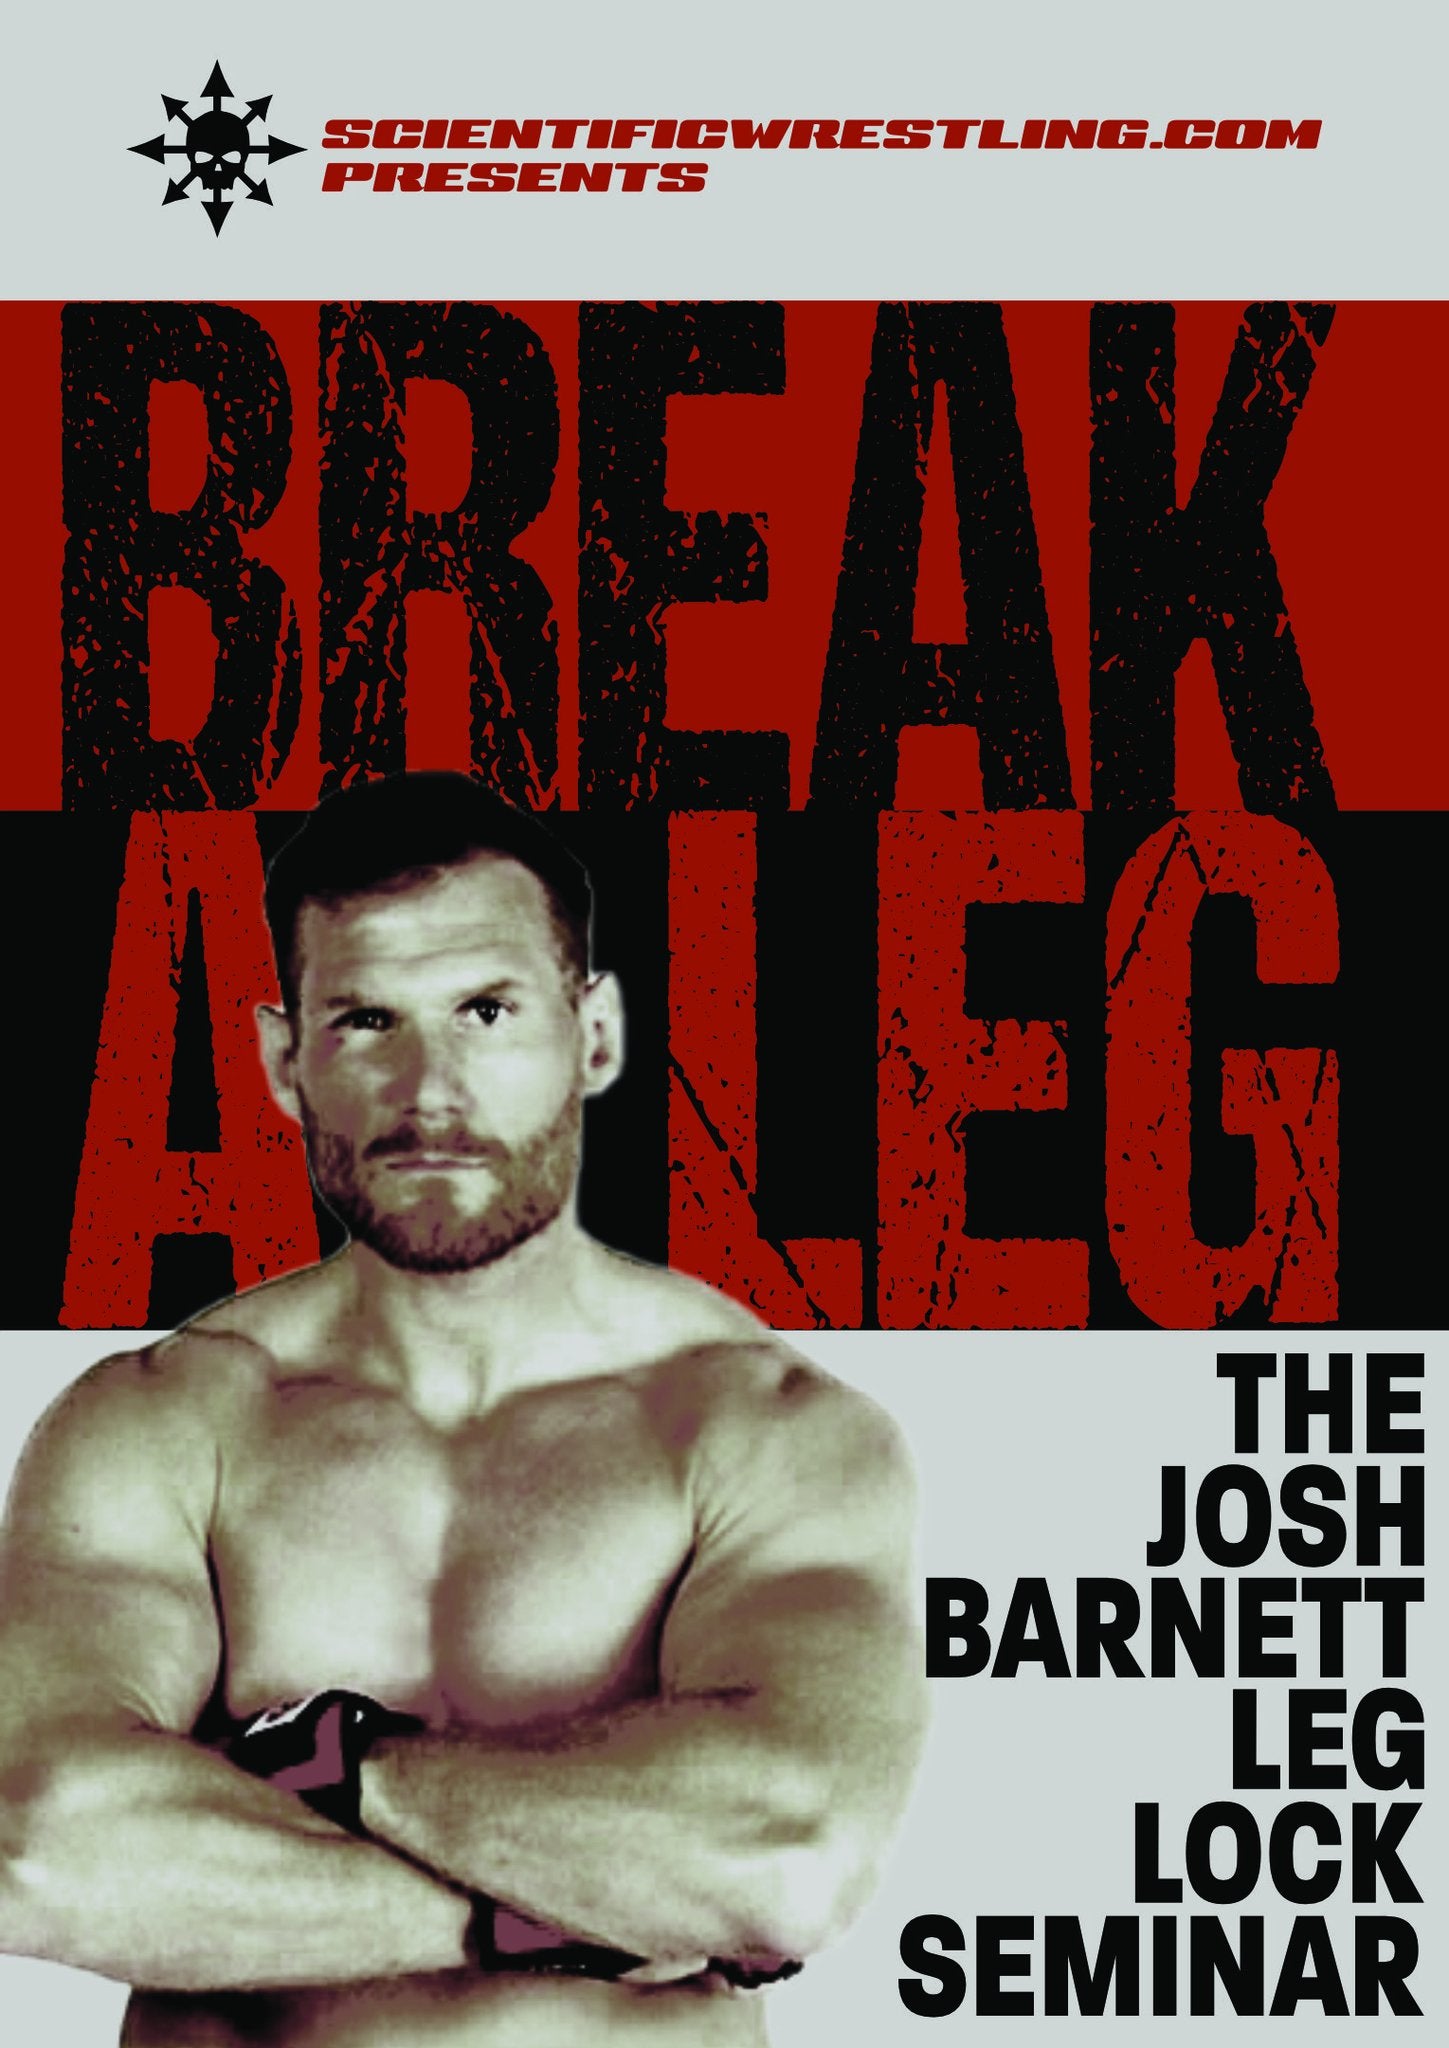 Break Legs with Josh Barnett 😱 and Kit Dale Masterclass series DVDs: Z Guard, Passing and the Art of Learning.